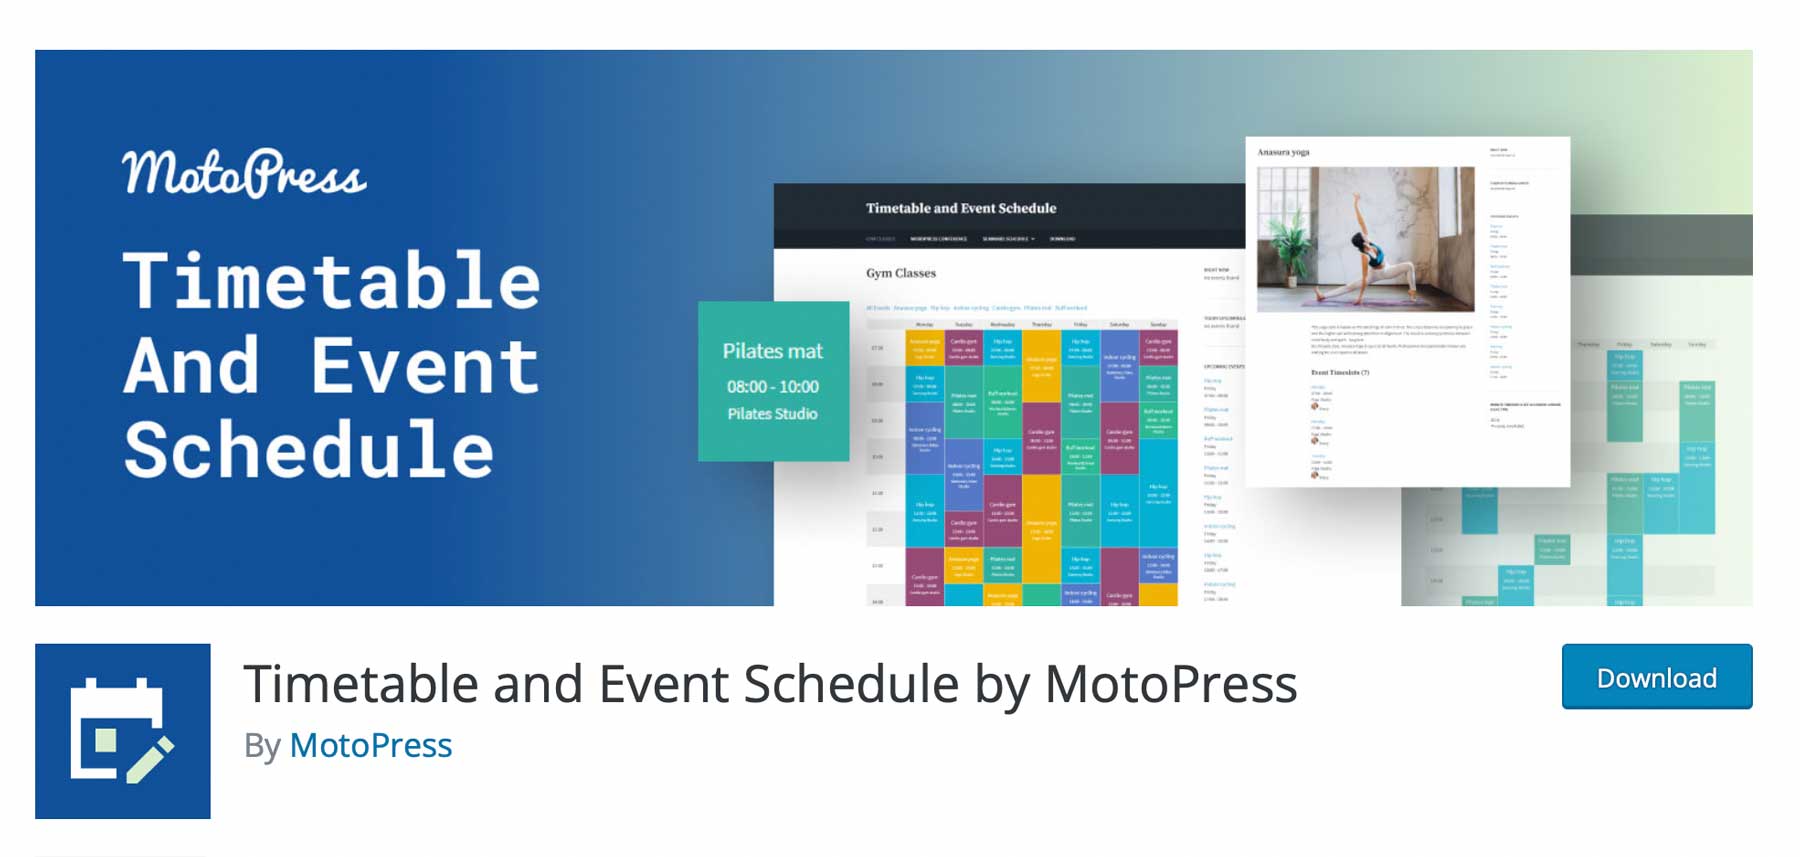 Timetable and Event Schedule by MotoPress